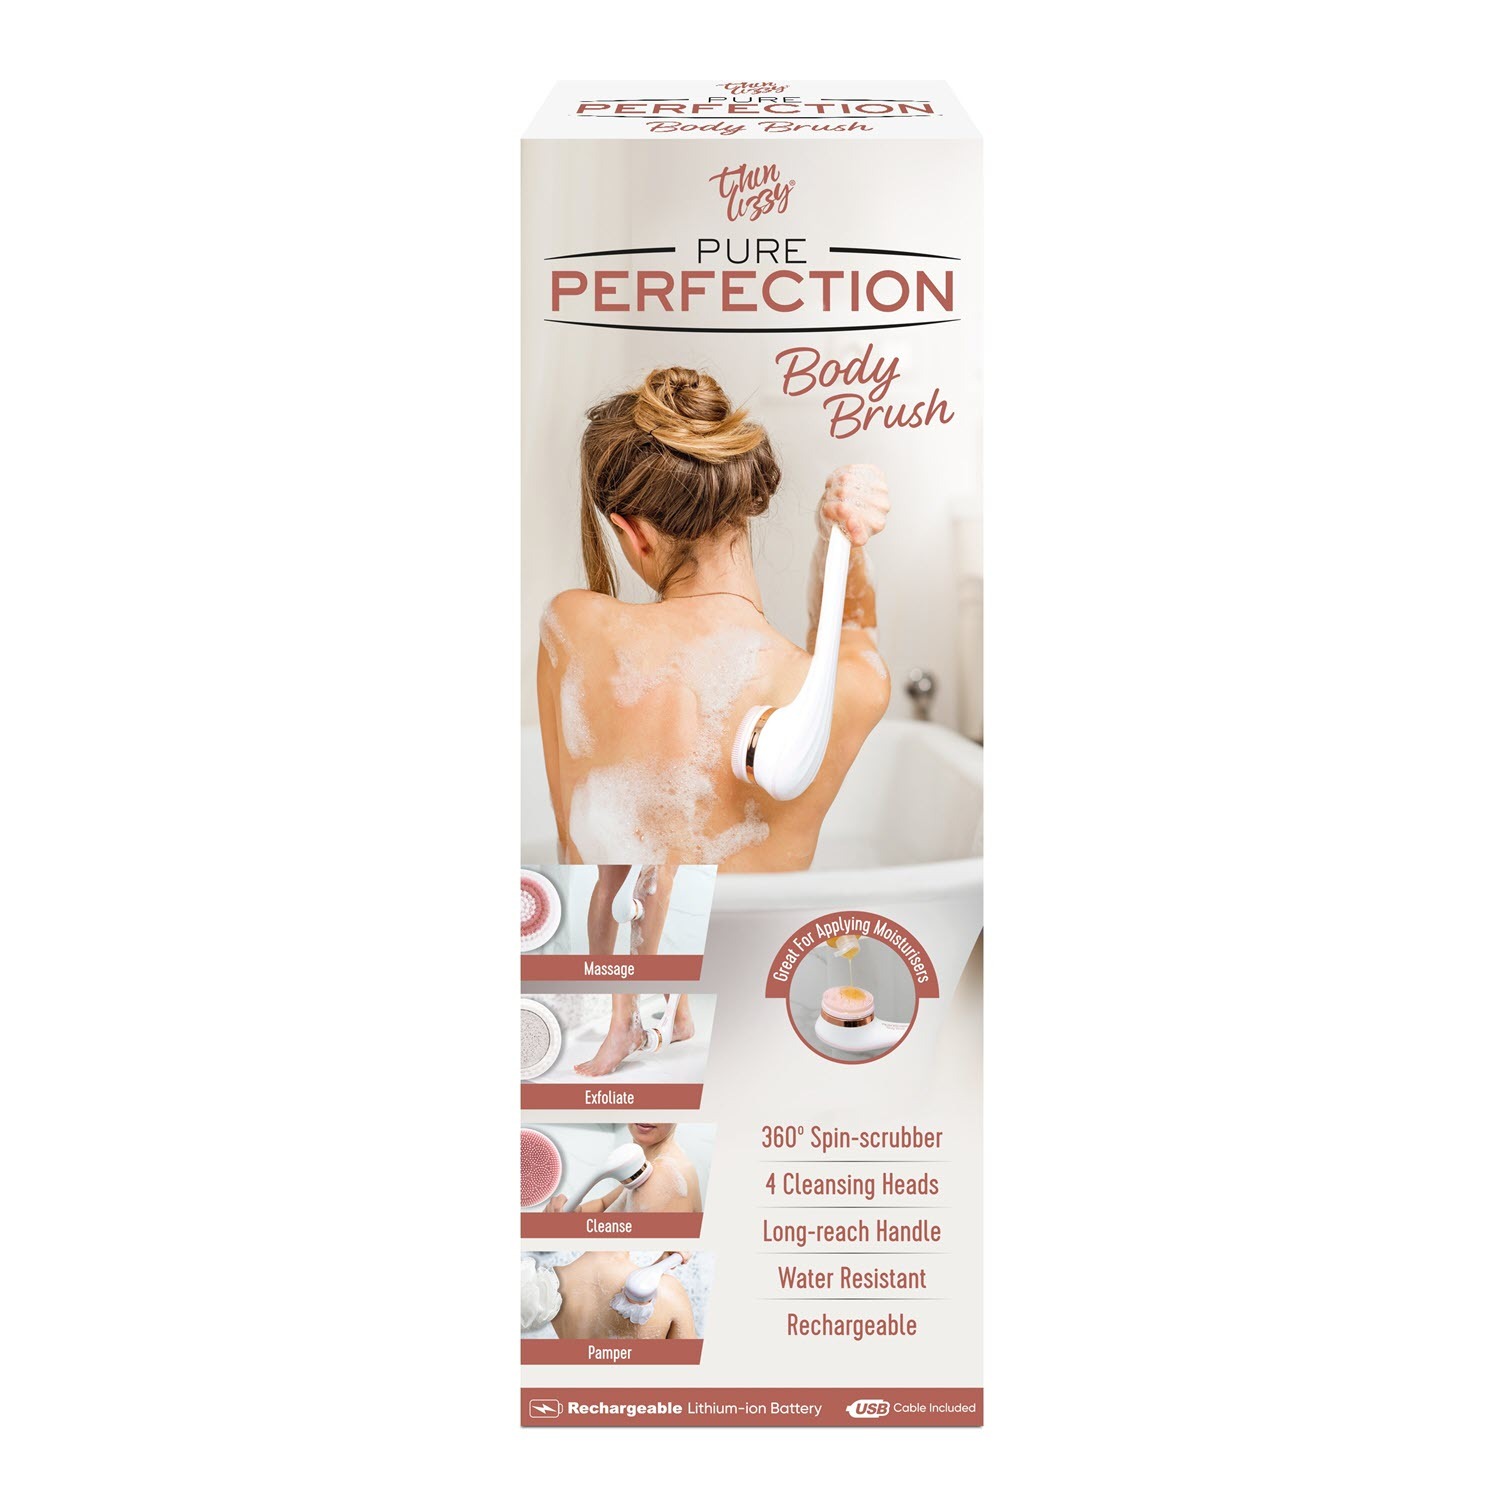 Pure Perfection Body Brush - View all